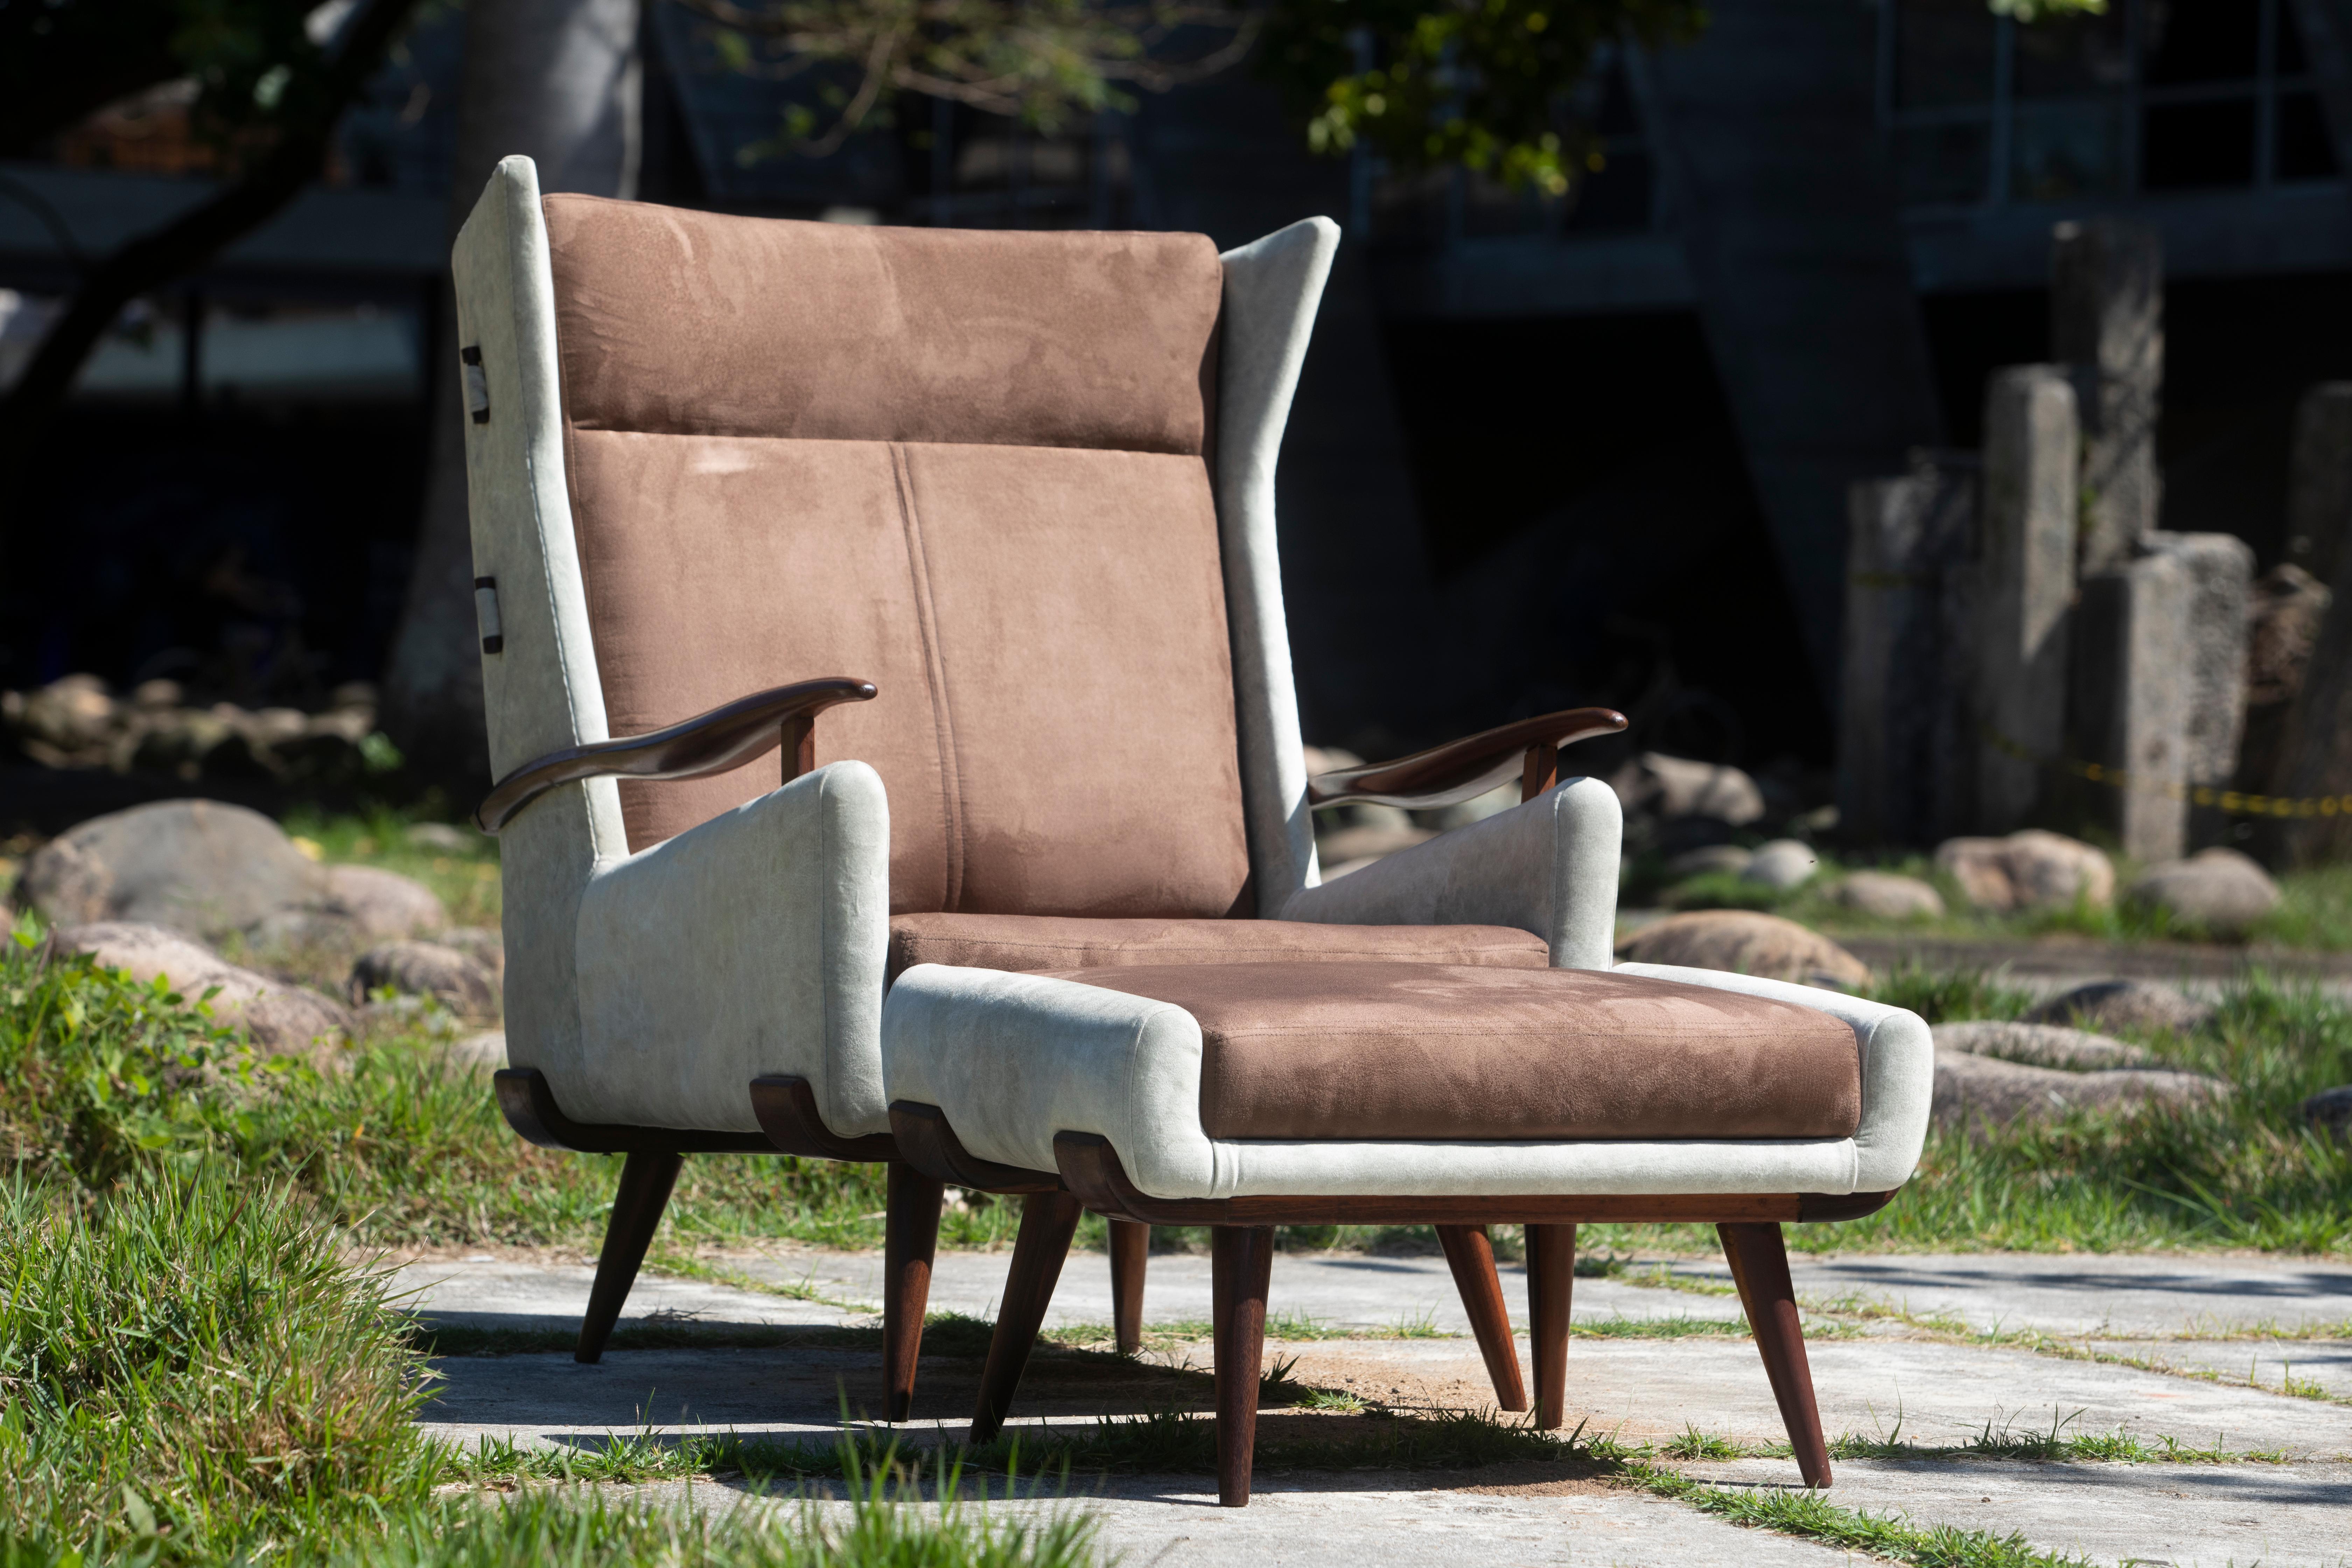 Mid-Century Modern Armchair with ottoman manufactured int he 1960s by Jorge Zalszupin, in Brazil.

This armchair with an ottoman was designed by Jorge Zalszupin, a Brazilian designer renowned for his exceptional craftsmanship and timeless designs.